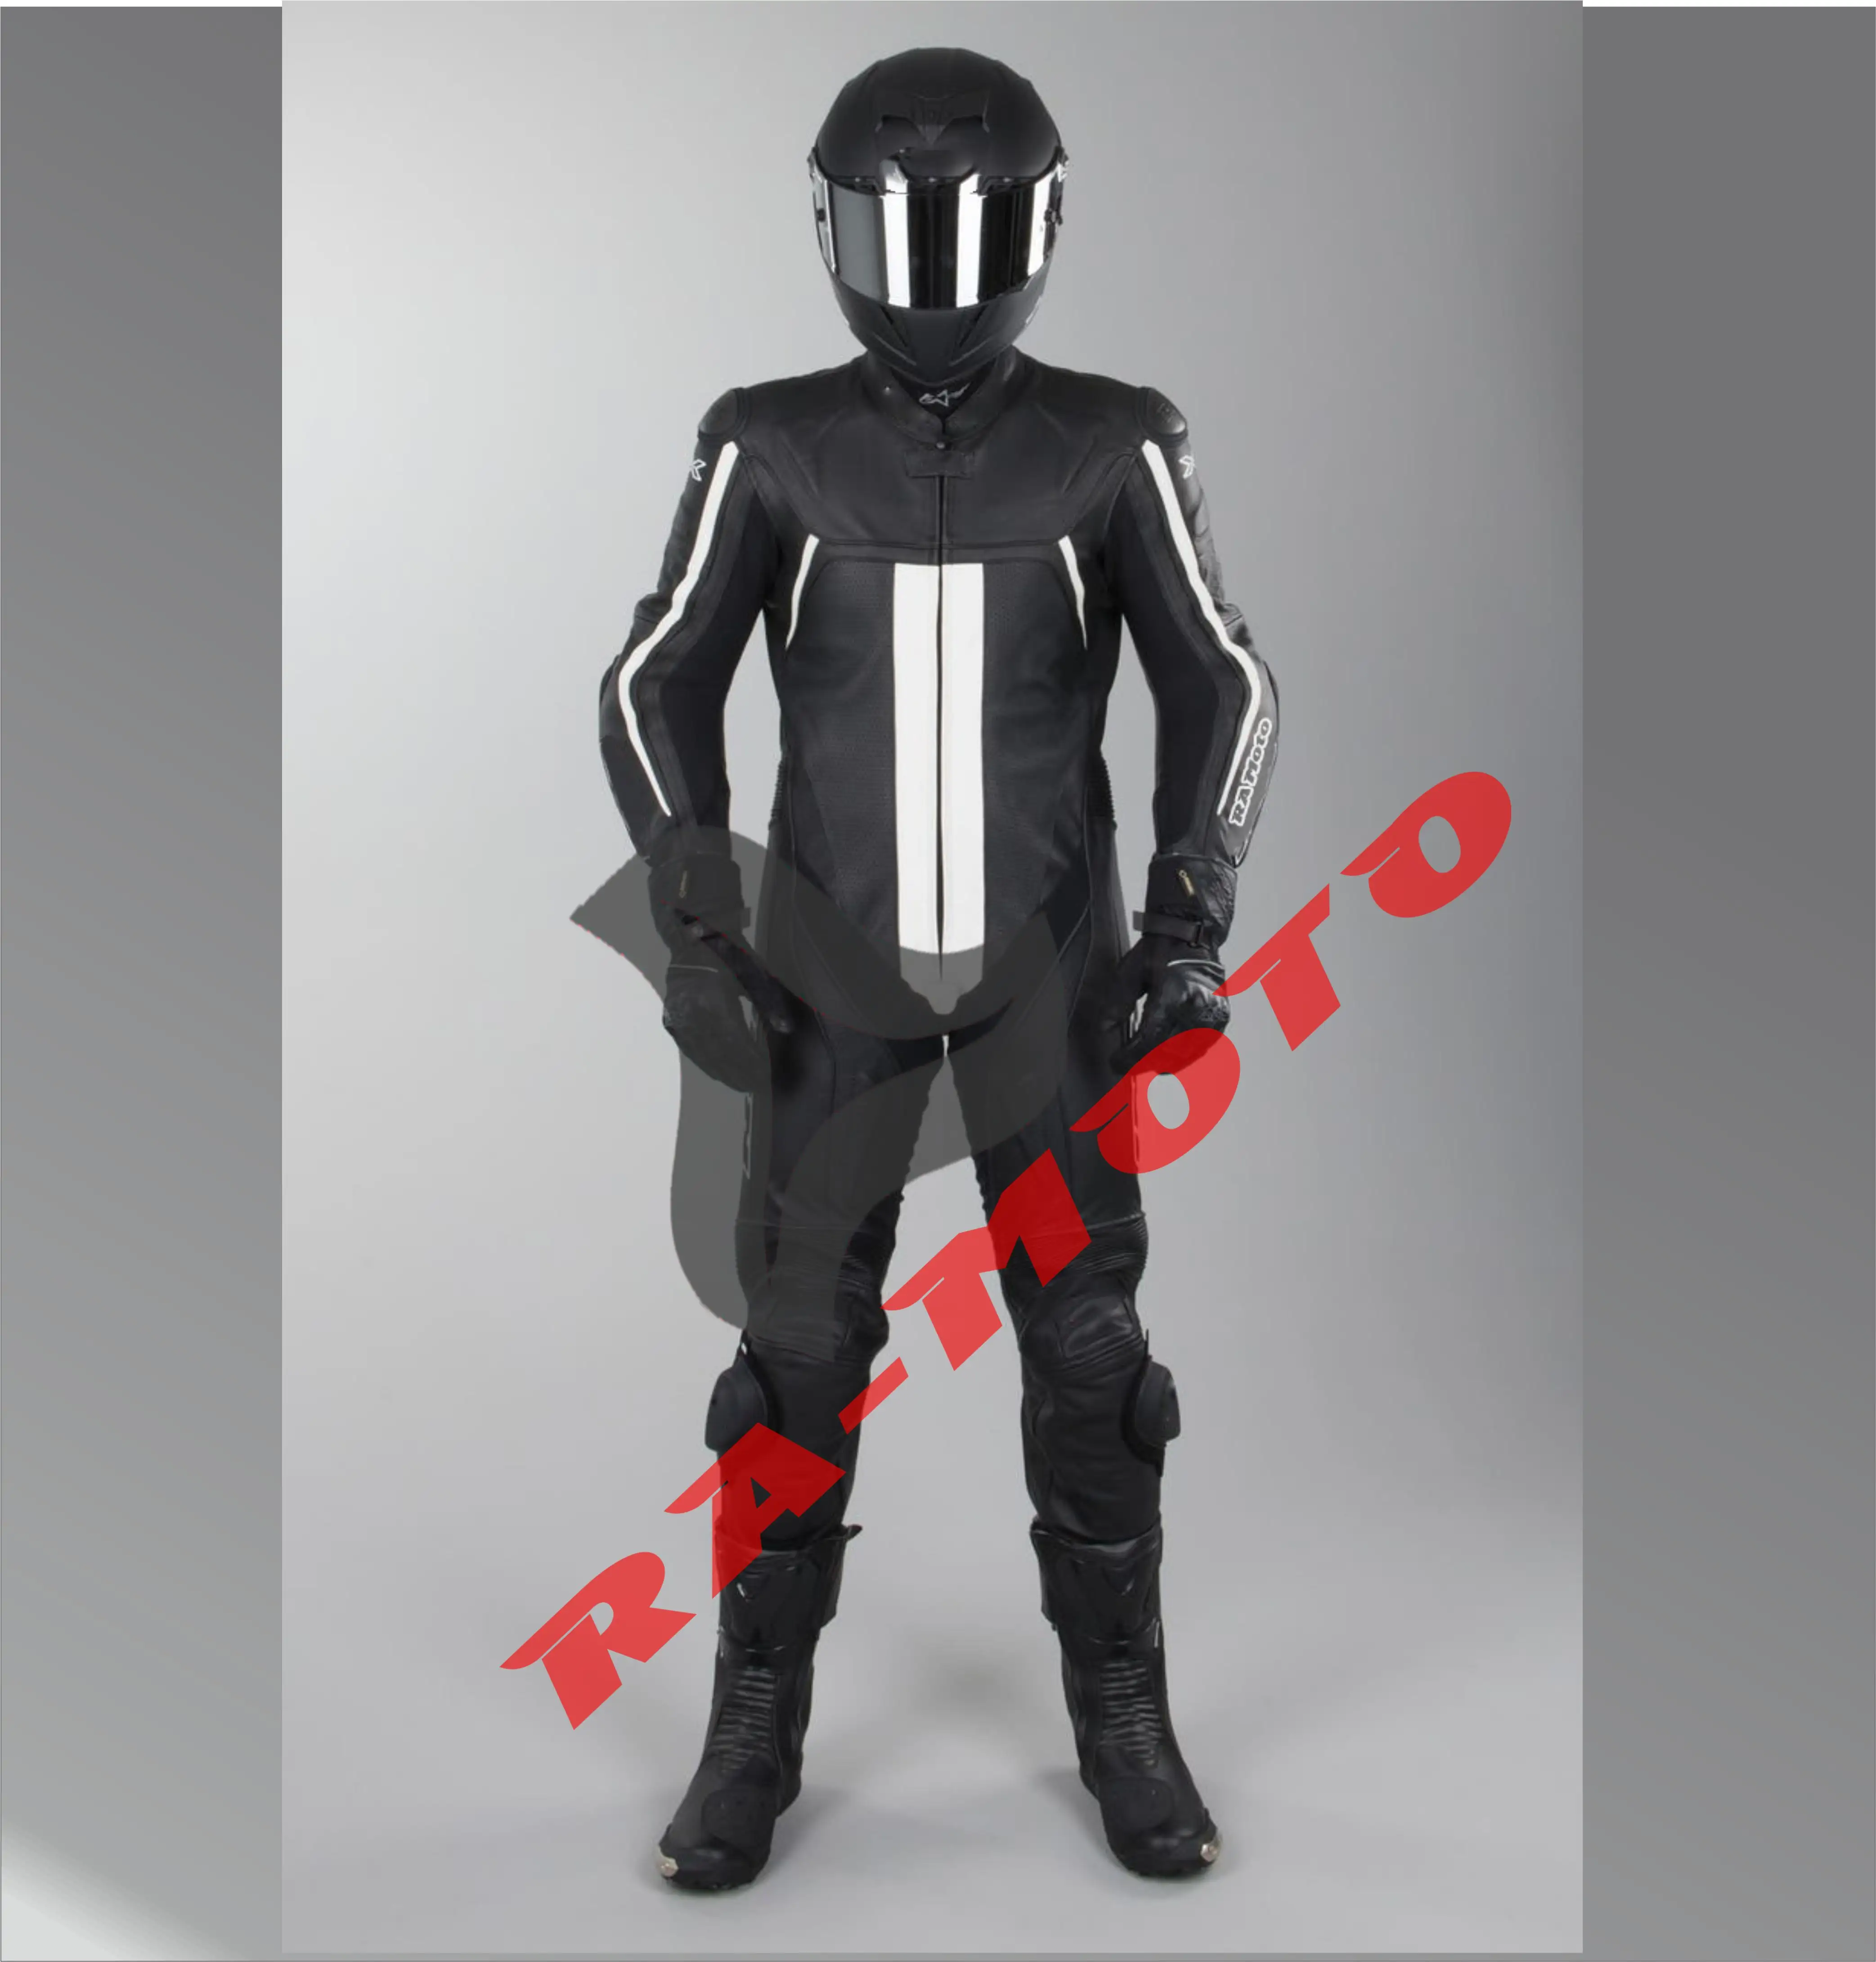 Hot New Arrival Leather Motorbike Leather Suits Custom Made Motorbike Racing Suit Motorcycle Protective Gear CE Proved